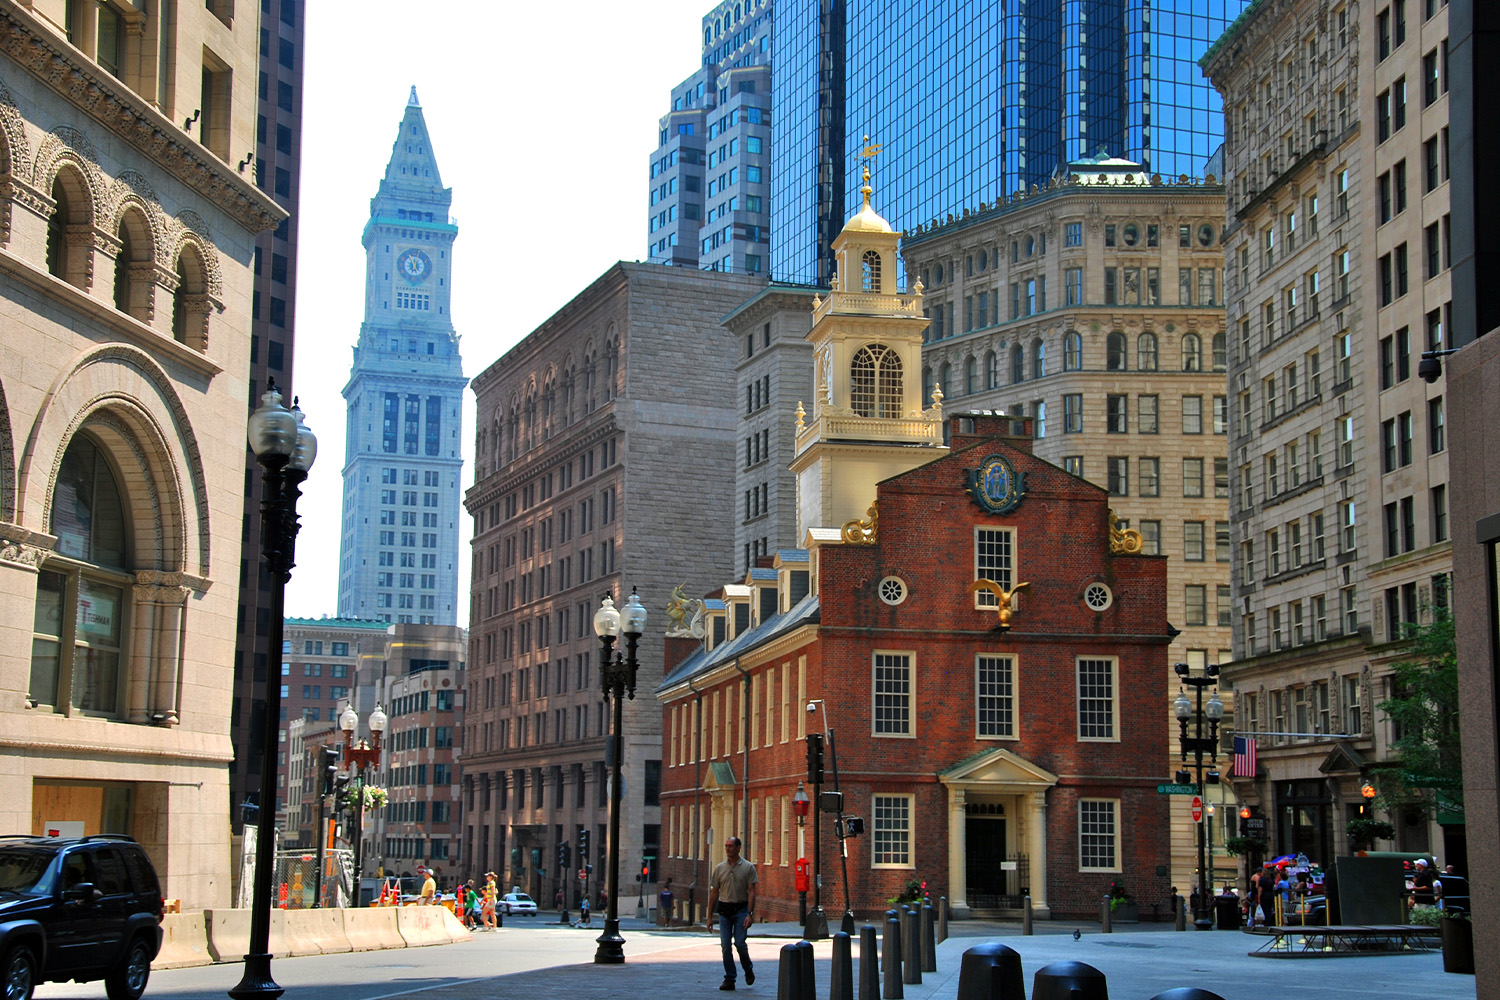 exterior view of the Old State House in Boston, Massachusetts